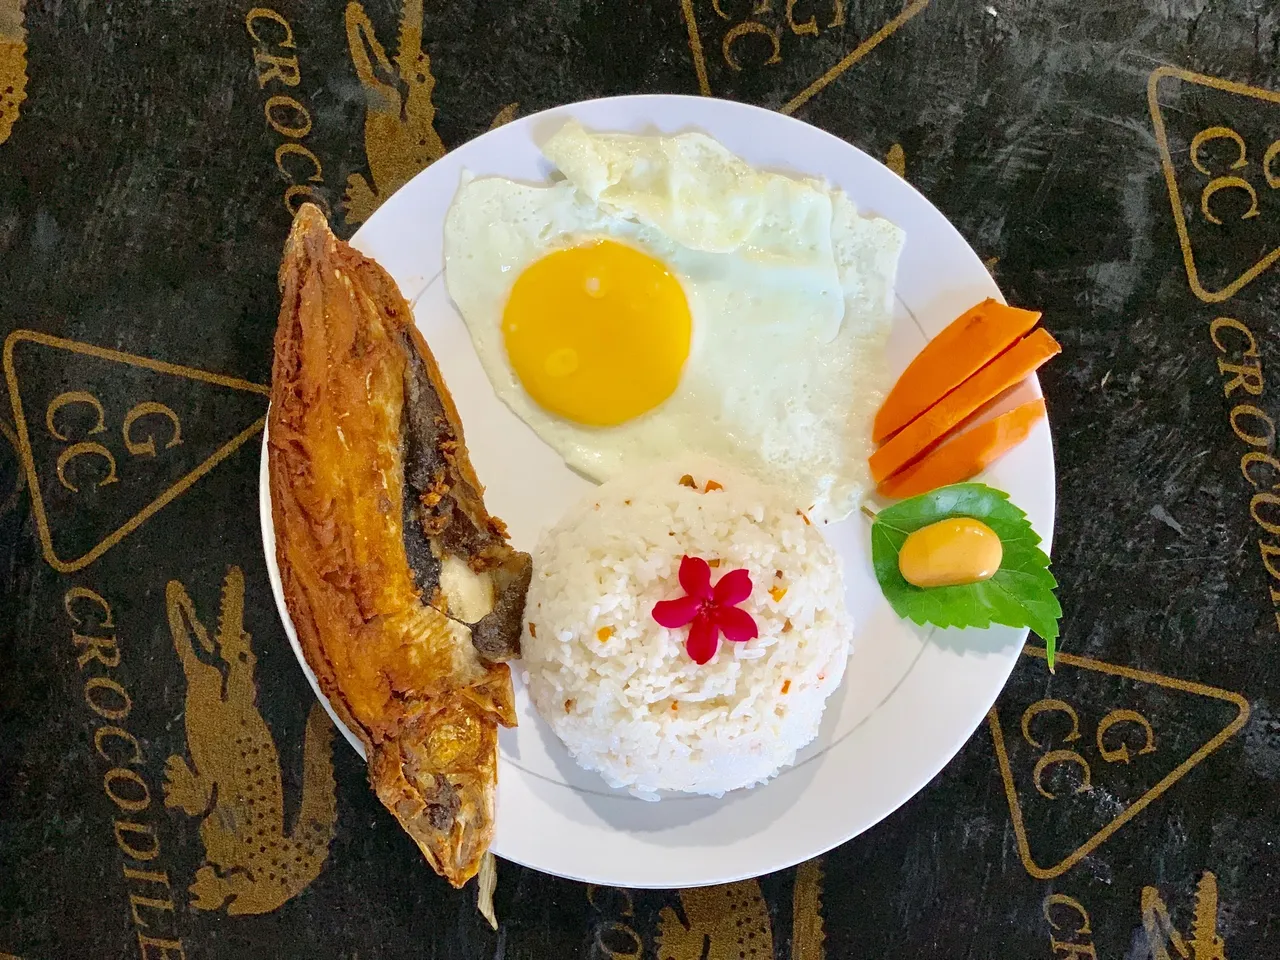 A plate of food with rice, an egg and some vegetables.